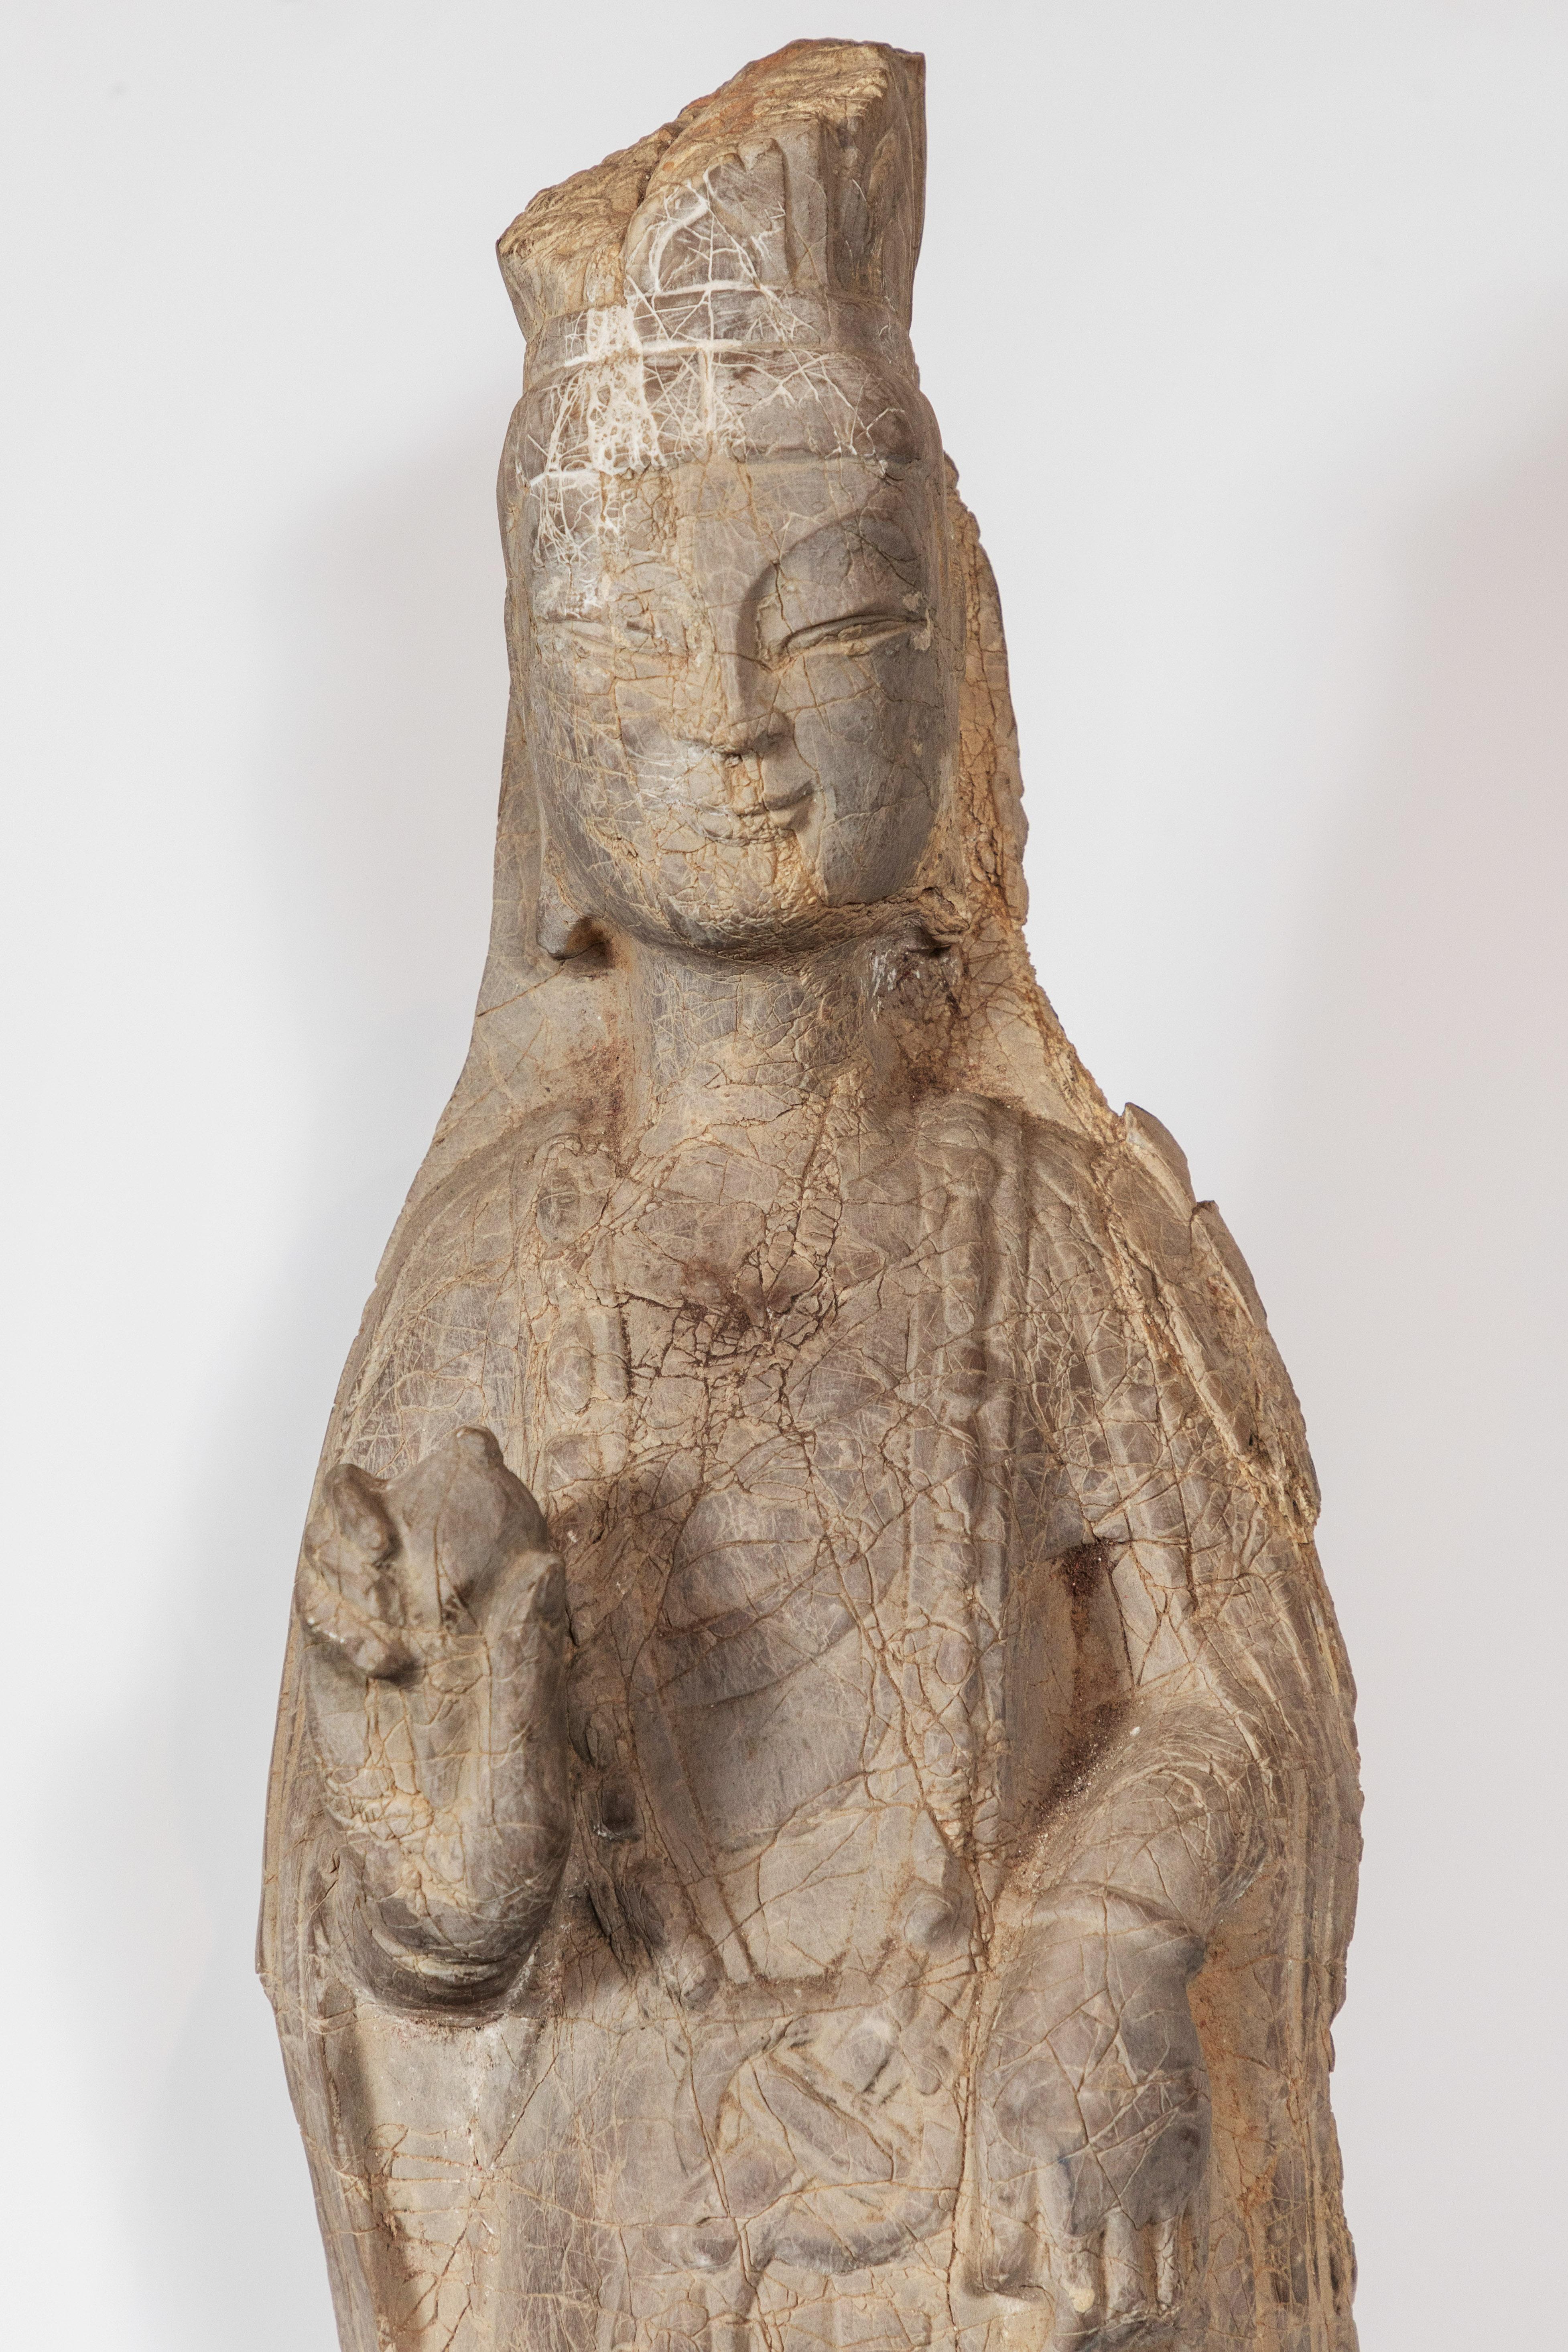 Elegant, carved stone figure of the goddess of compassion and mercy, Kwan Yin. She wears stylized robes and makes a gesture blessing. The surface is wonderfully worn and cracked throughout, giving it a far older appearance. Mounted on a custom, iron